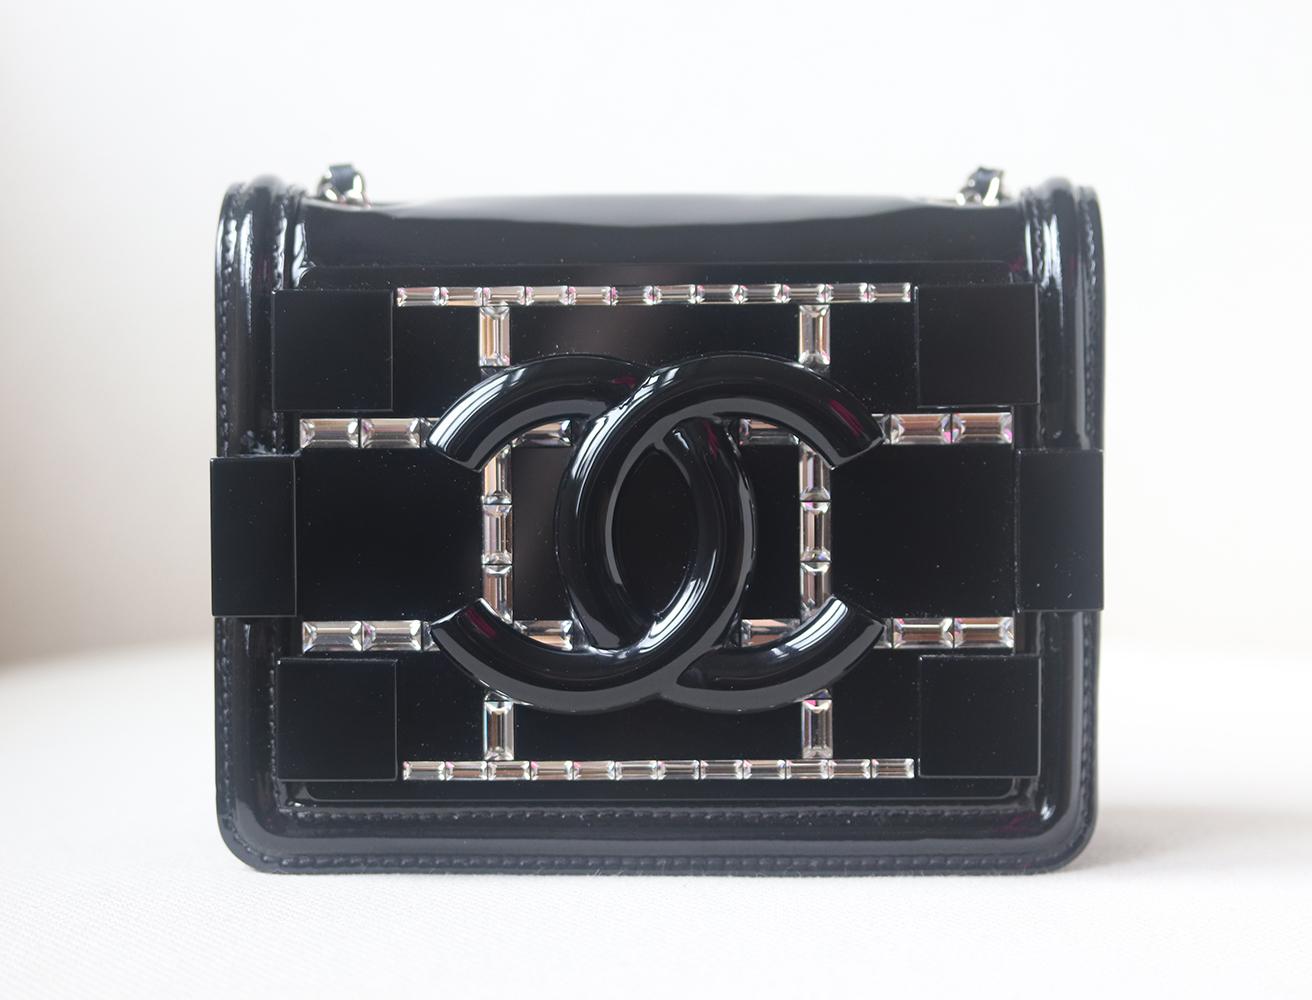 Chanel Limited Edition Boy Brick Crystal and Plexi Crossbody Bag has been hand-finished by skilled artisans in the label's workshop.
Boasting quilted patent-leather exterior, this design is accented with crystal embellishment on the front and black